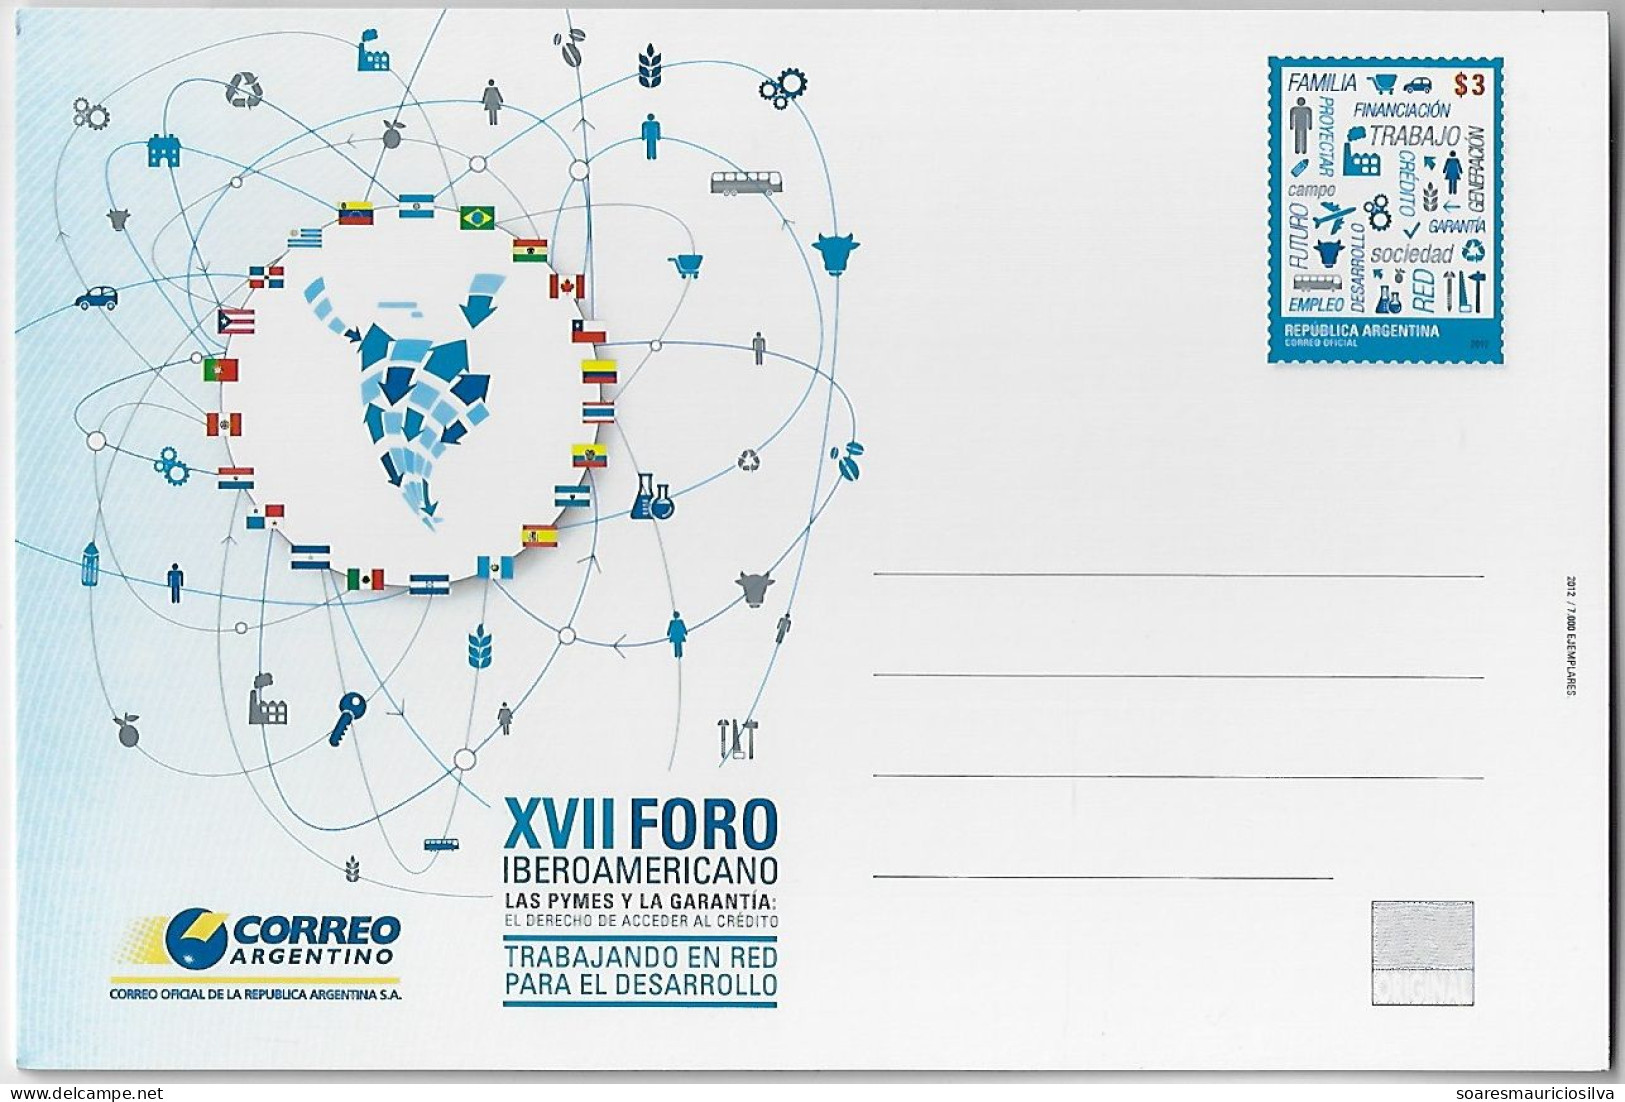 Argentina 2012 Postal Stationery Card Ibero-American Forum SMEs & The Guarantee The Right To Access Credit Unused - Postal Stationery